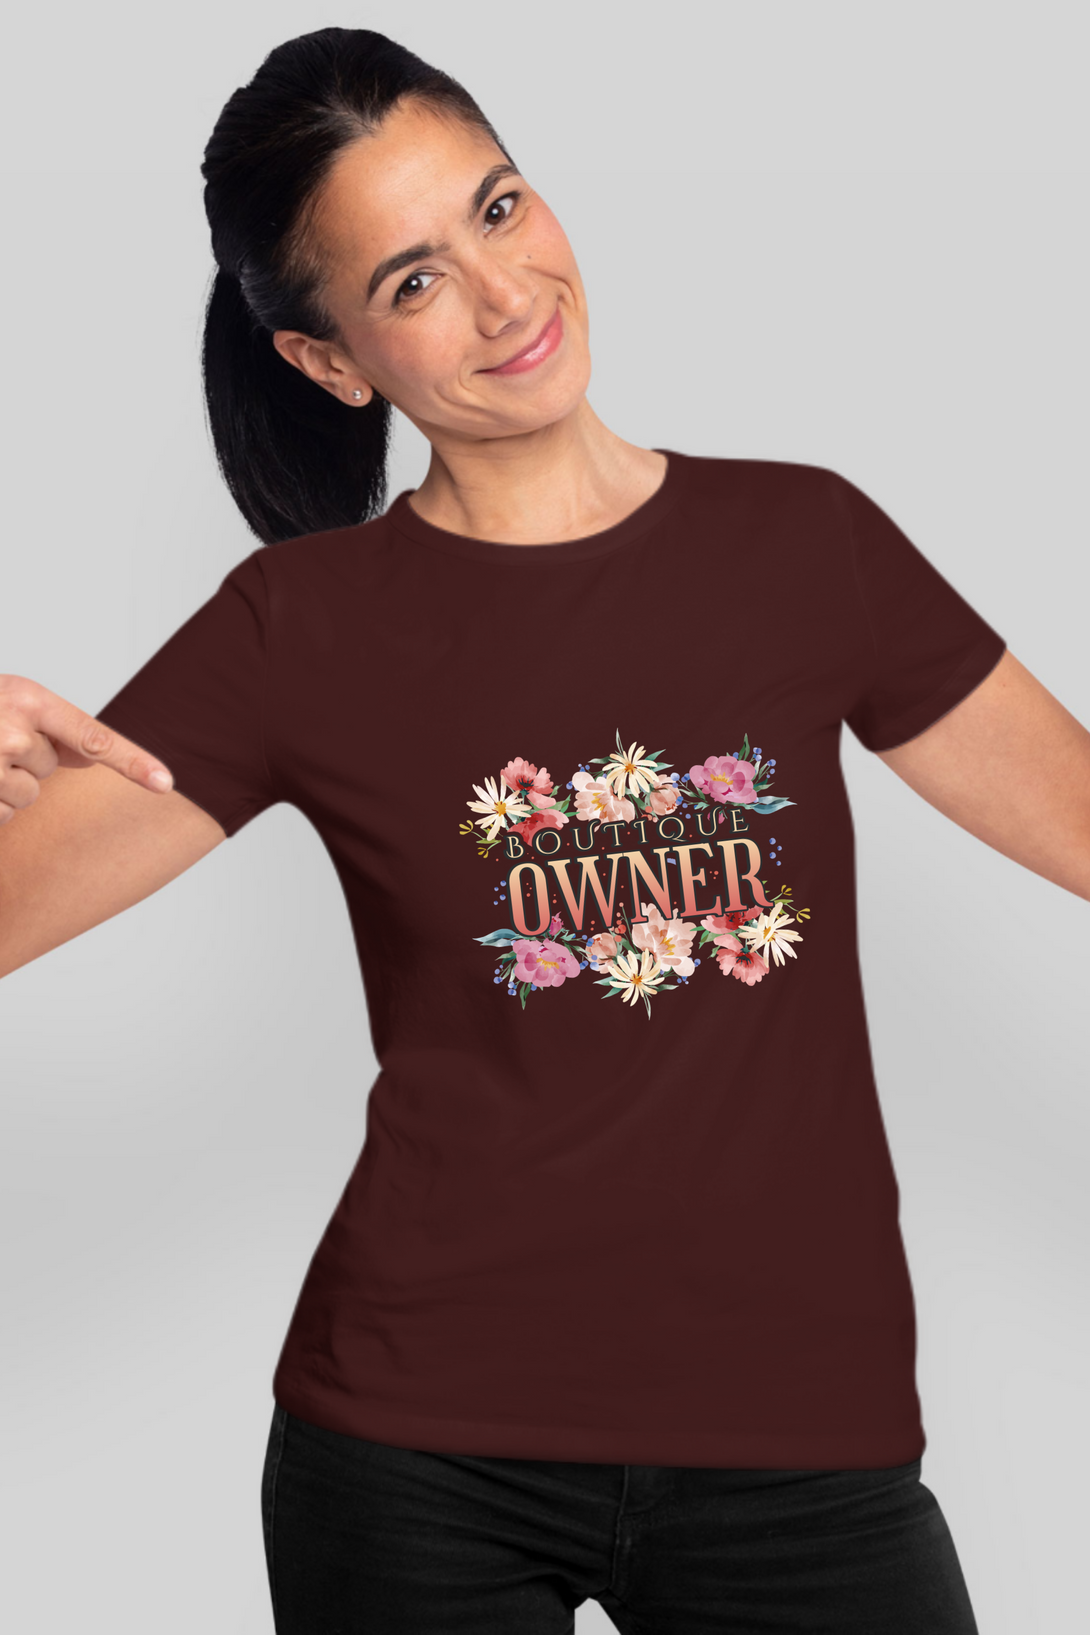 Flowers Boutique Printed T-Shirt For Women - WowWaves - 8